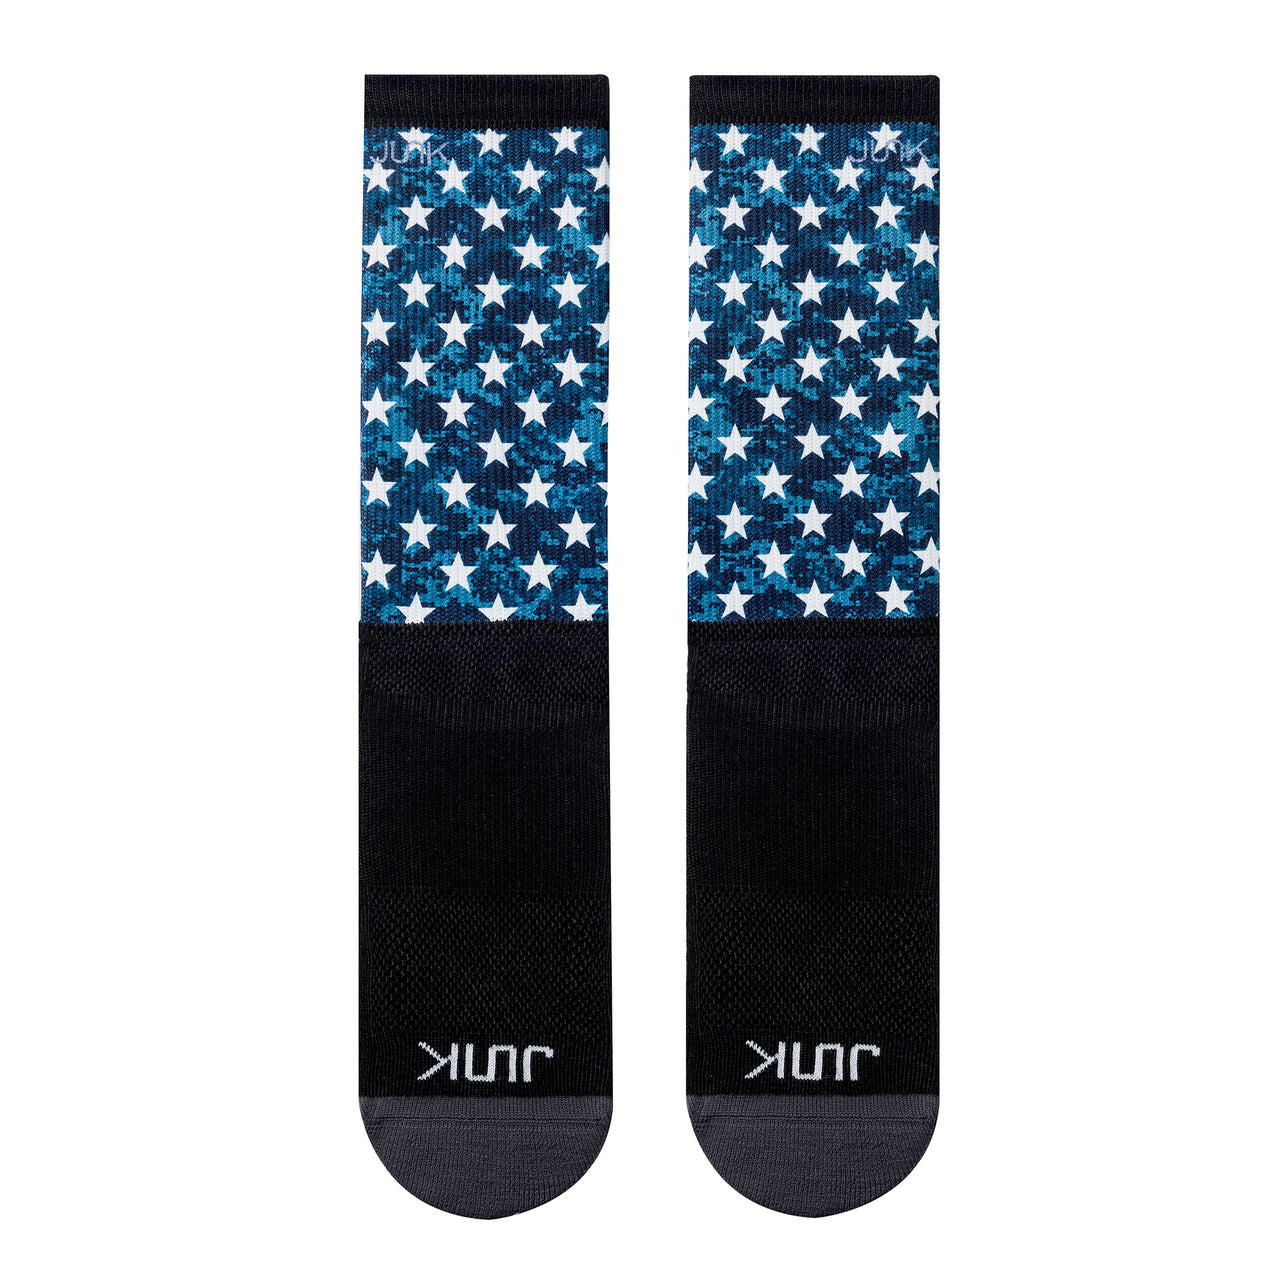 top front view of american flag red white and blue printed JUNK athletic socks